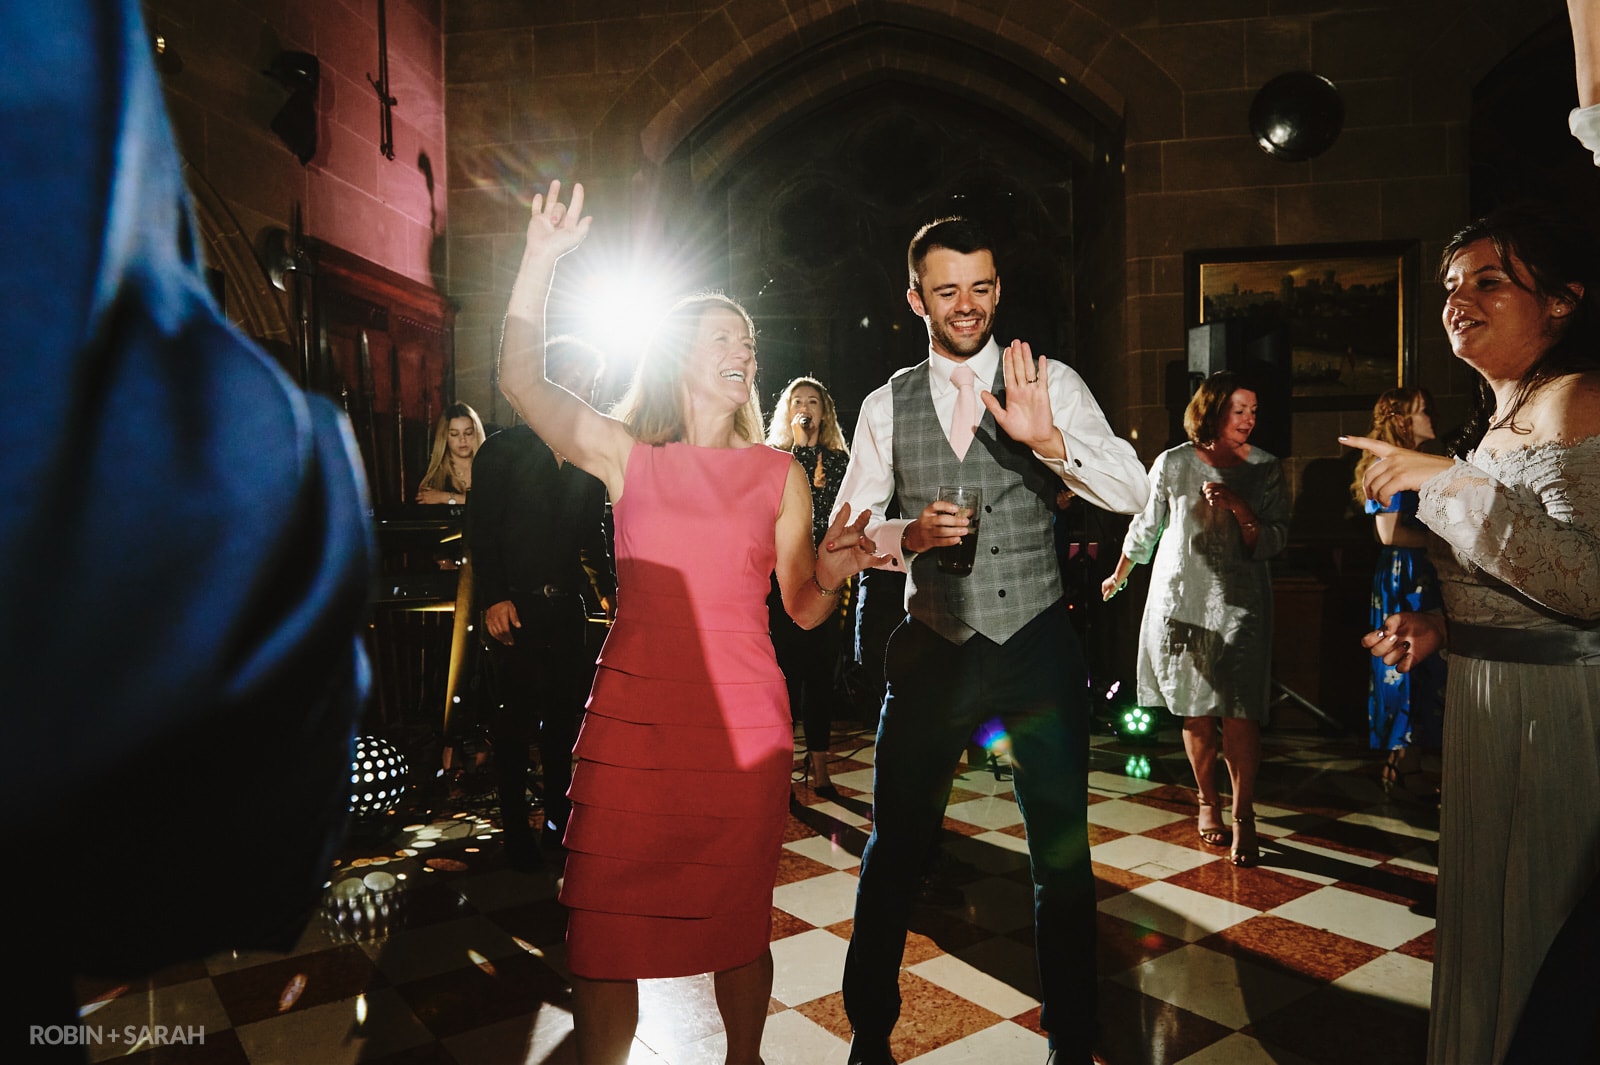 Wedding guests dance in Great Hall at Warwick Castle